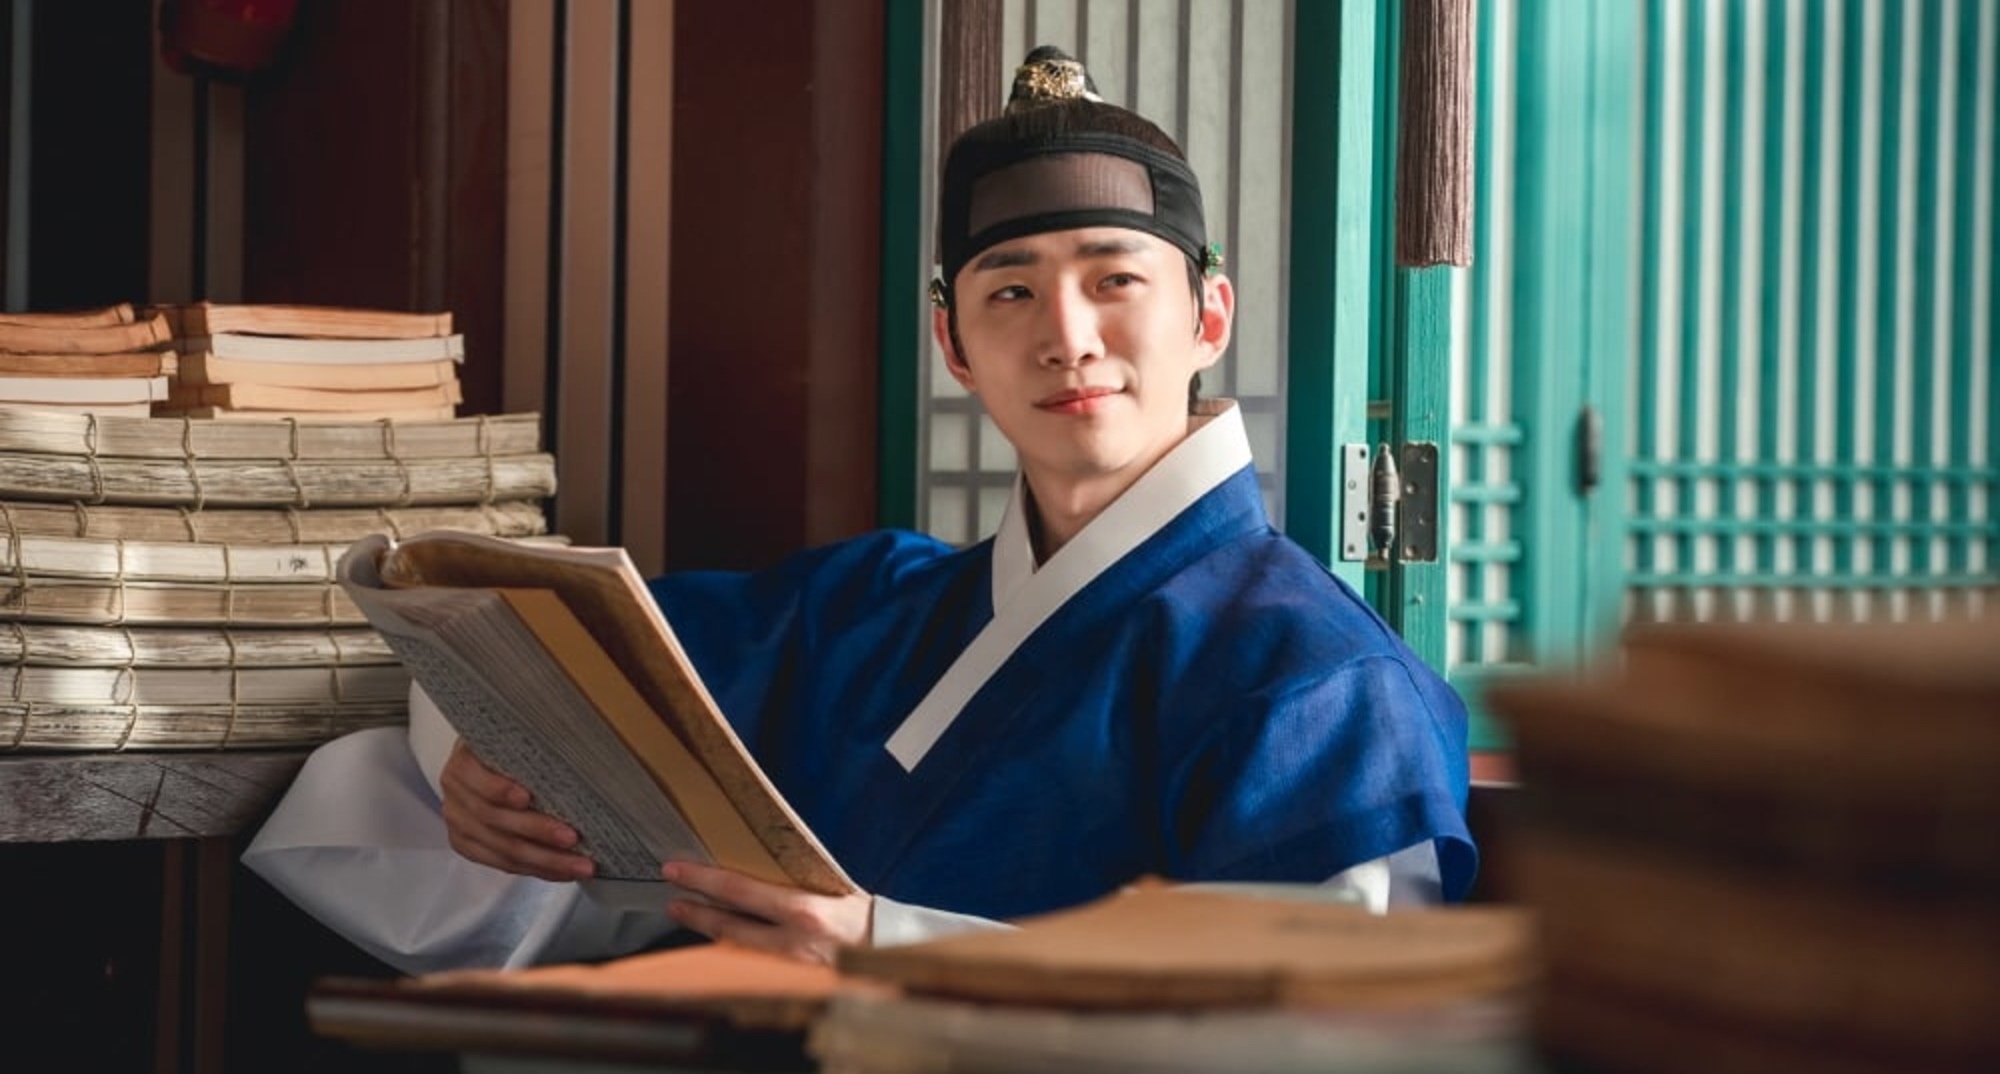 Actor Lee Junho as Yi San in 'The Red Sleeve' wearing traditional robes.